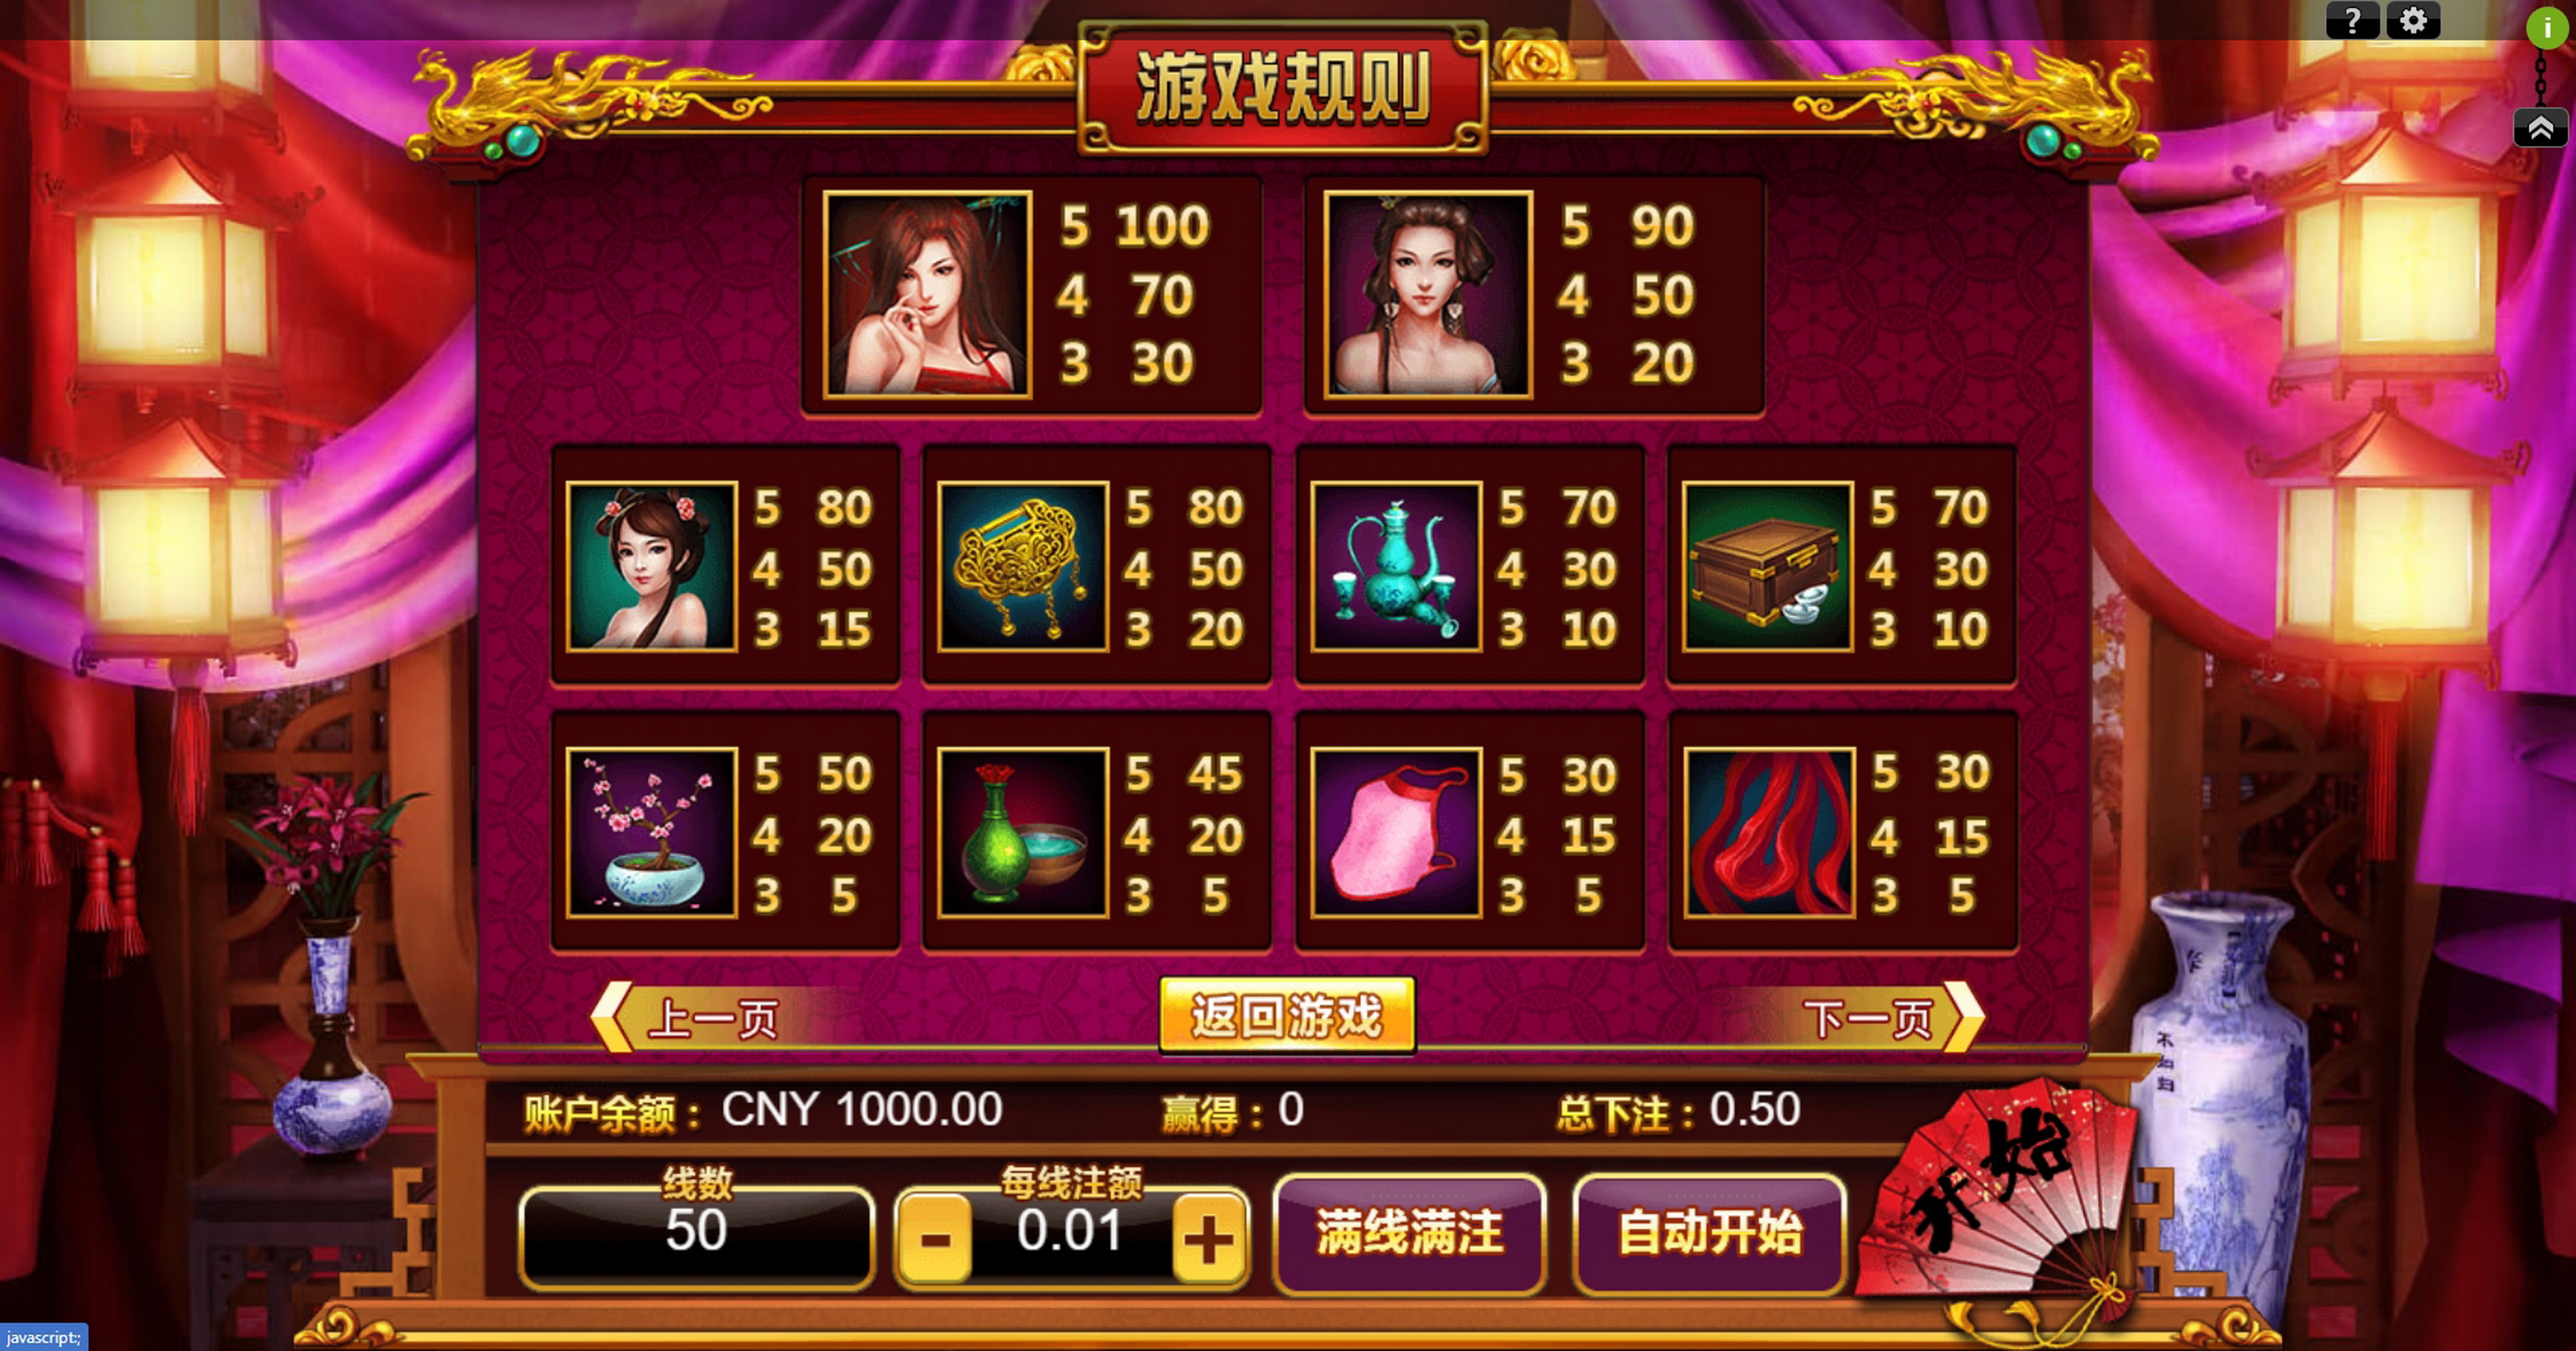 Info of The Golden Lotus Slot Game by Aiwin Games